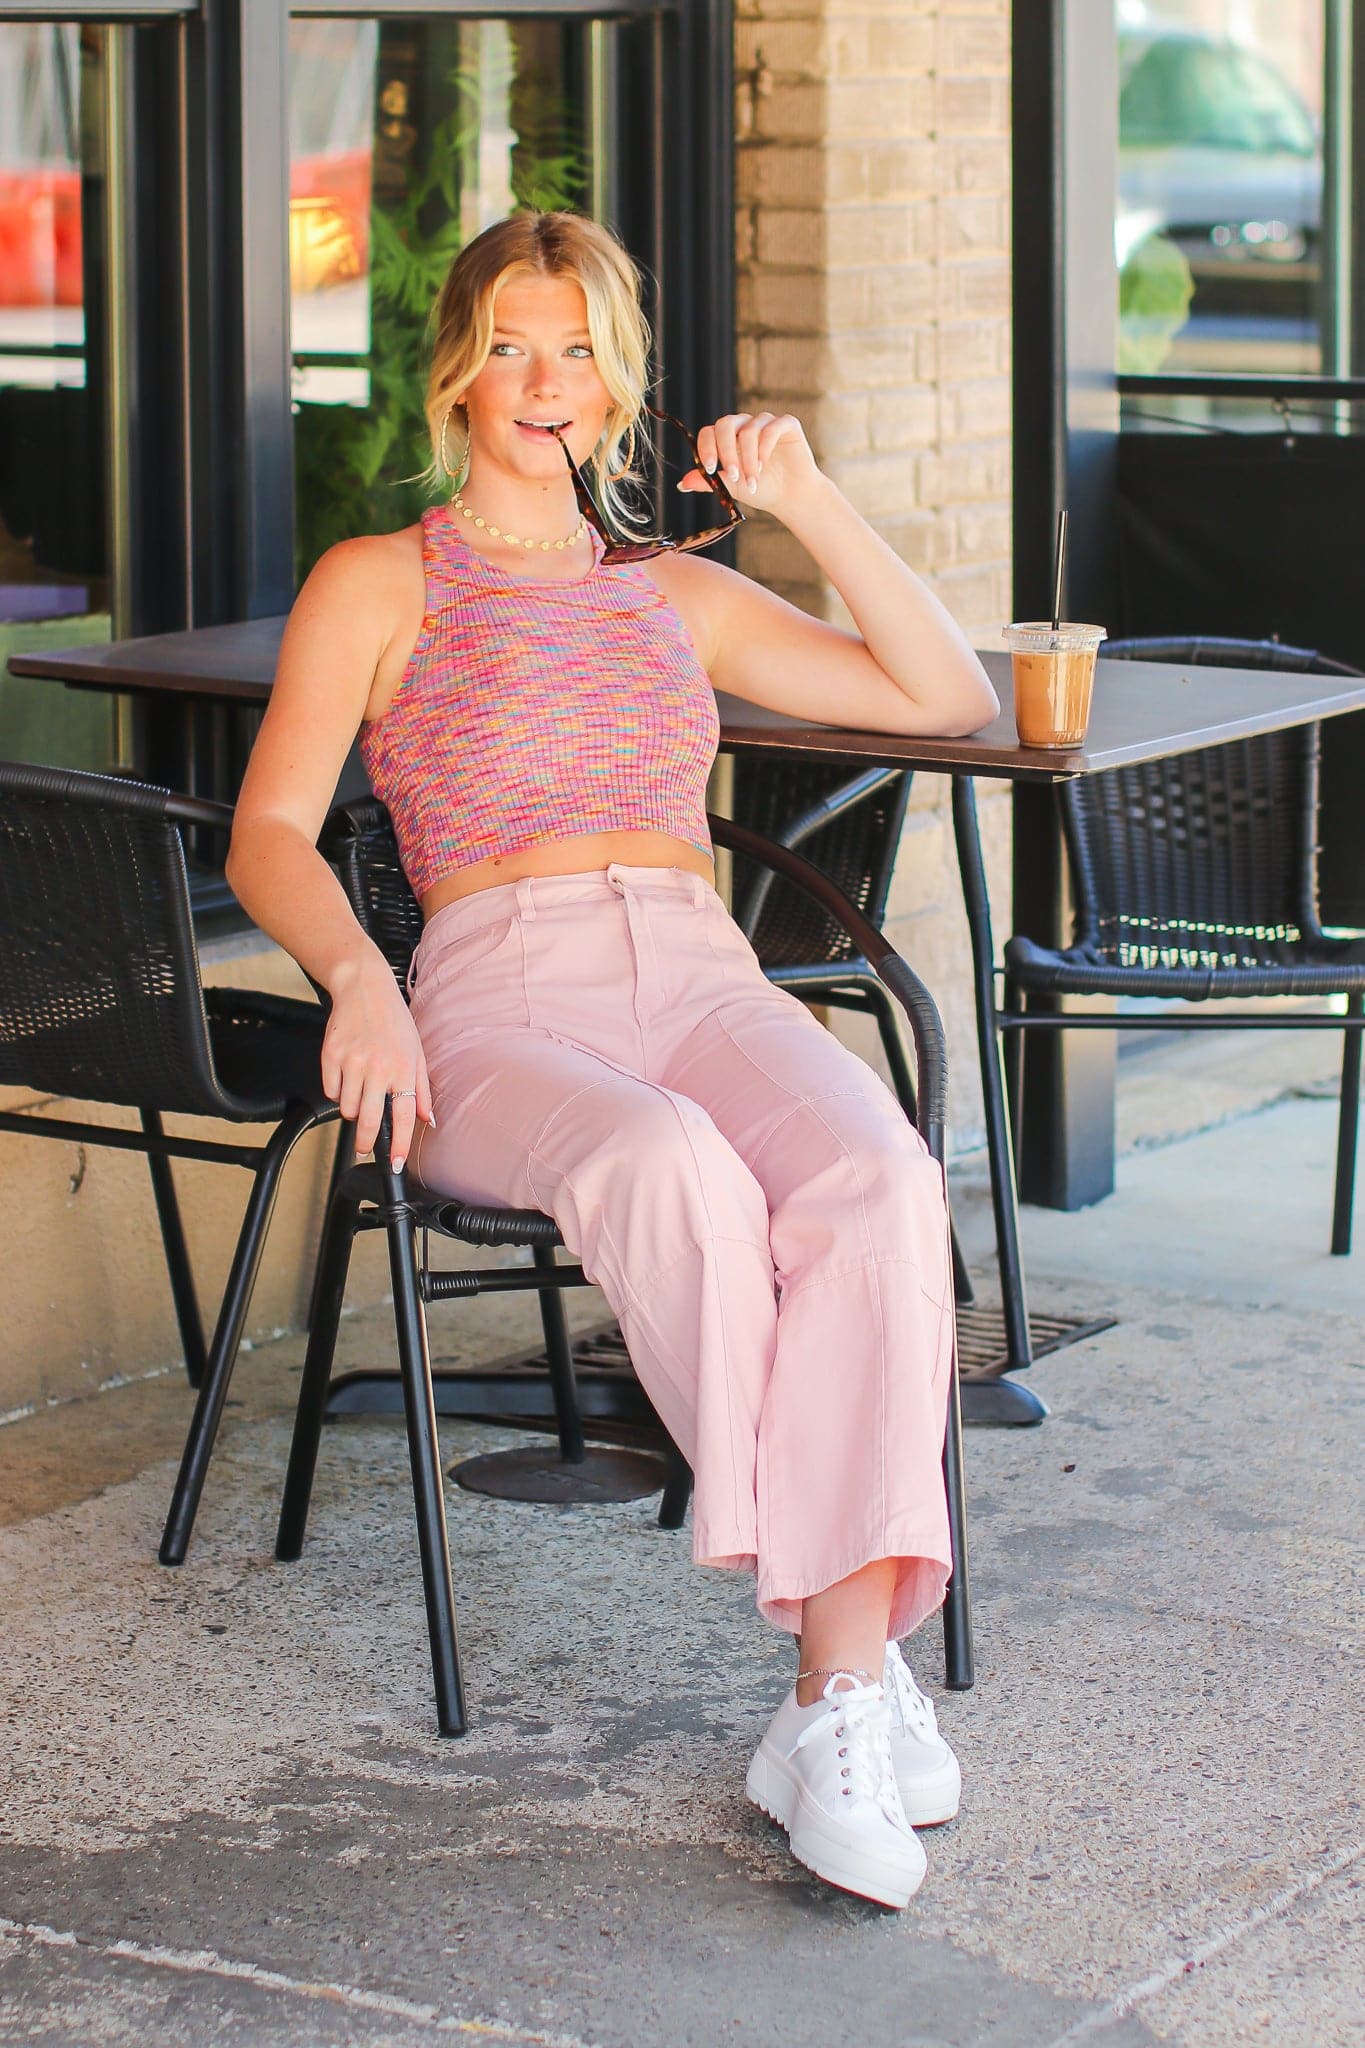  Brightest Days Twist Back Multi Knit Crop Top - FINAL SALE - Madison and Mallory